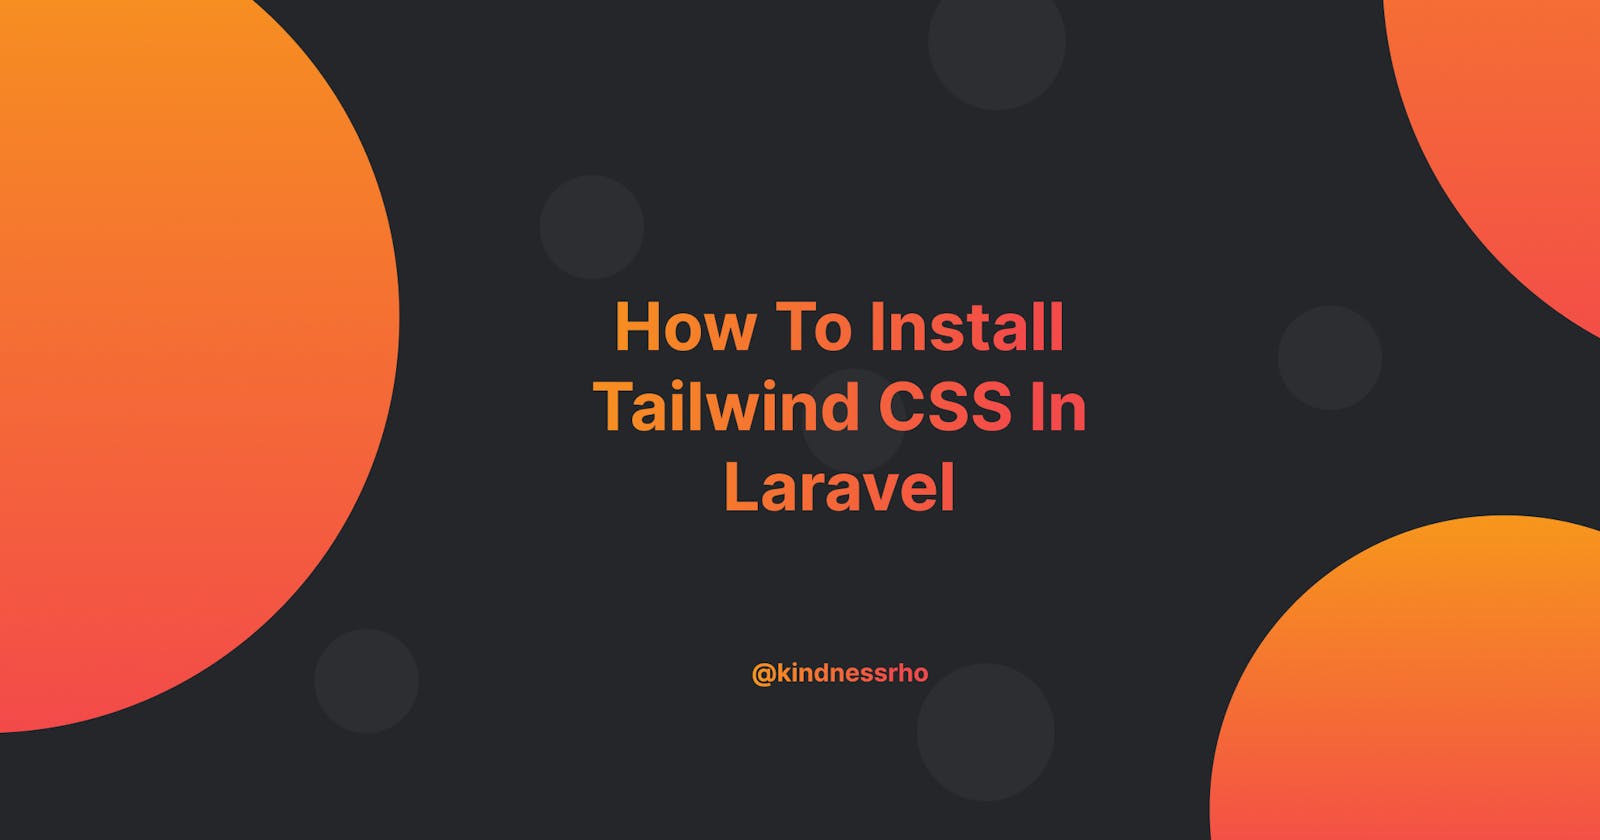 How To Install Tailwind CSS In Laravel